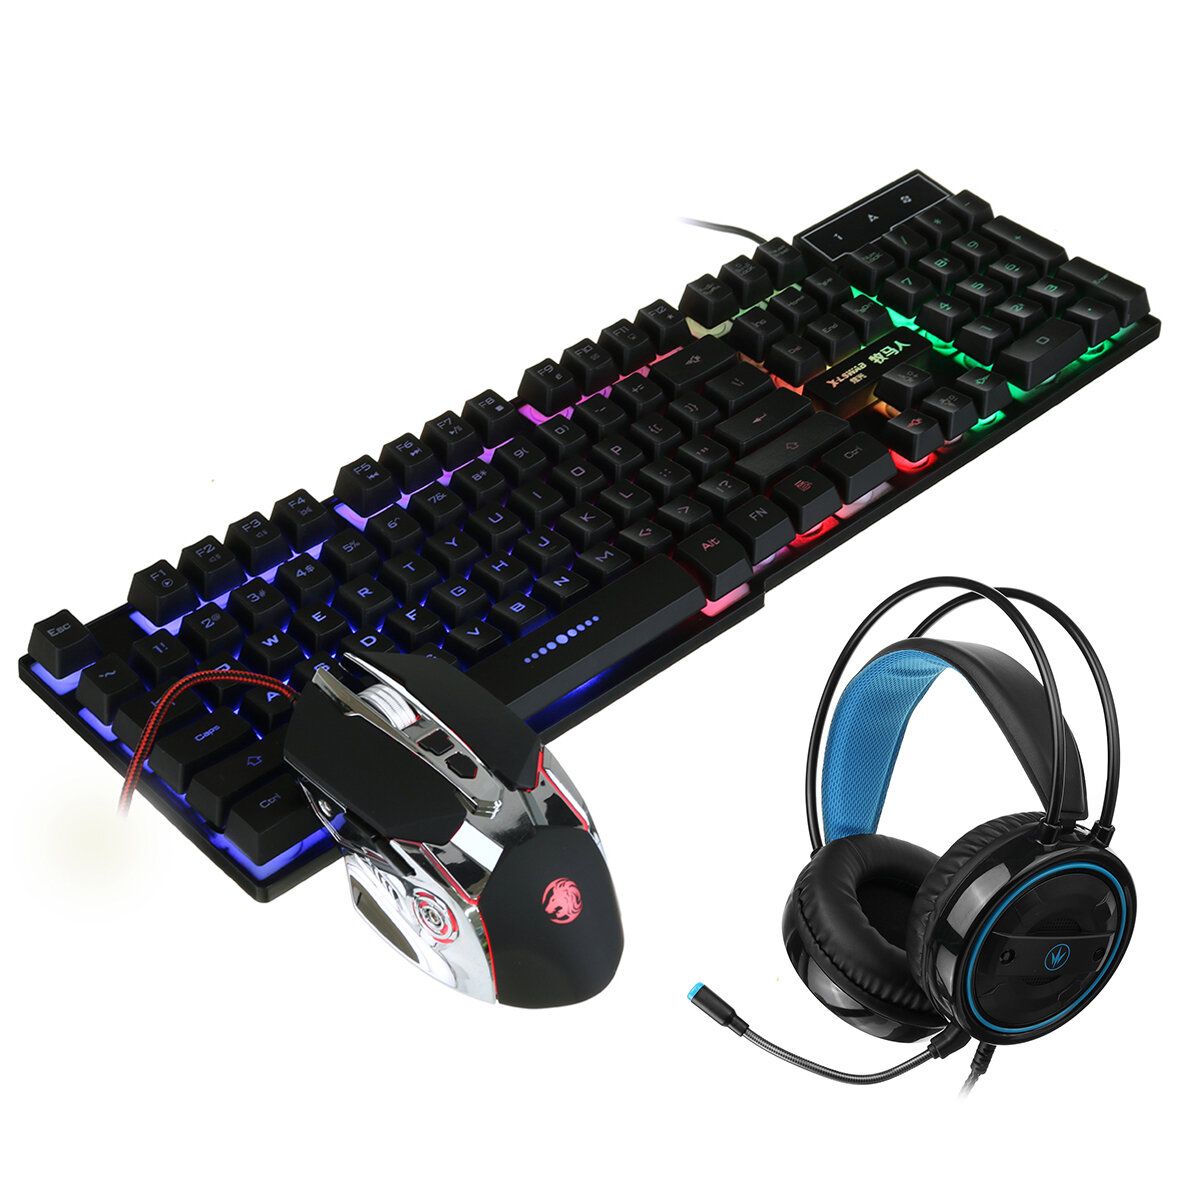 Bakeey Mice Keyboards Headphones Combo 104-Key Backlit Mechanical Waterproof Wired Keyboard G5 800DPI Wired Mice 7.1 Stereo Sound 3.5MM USB…